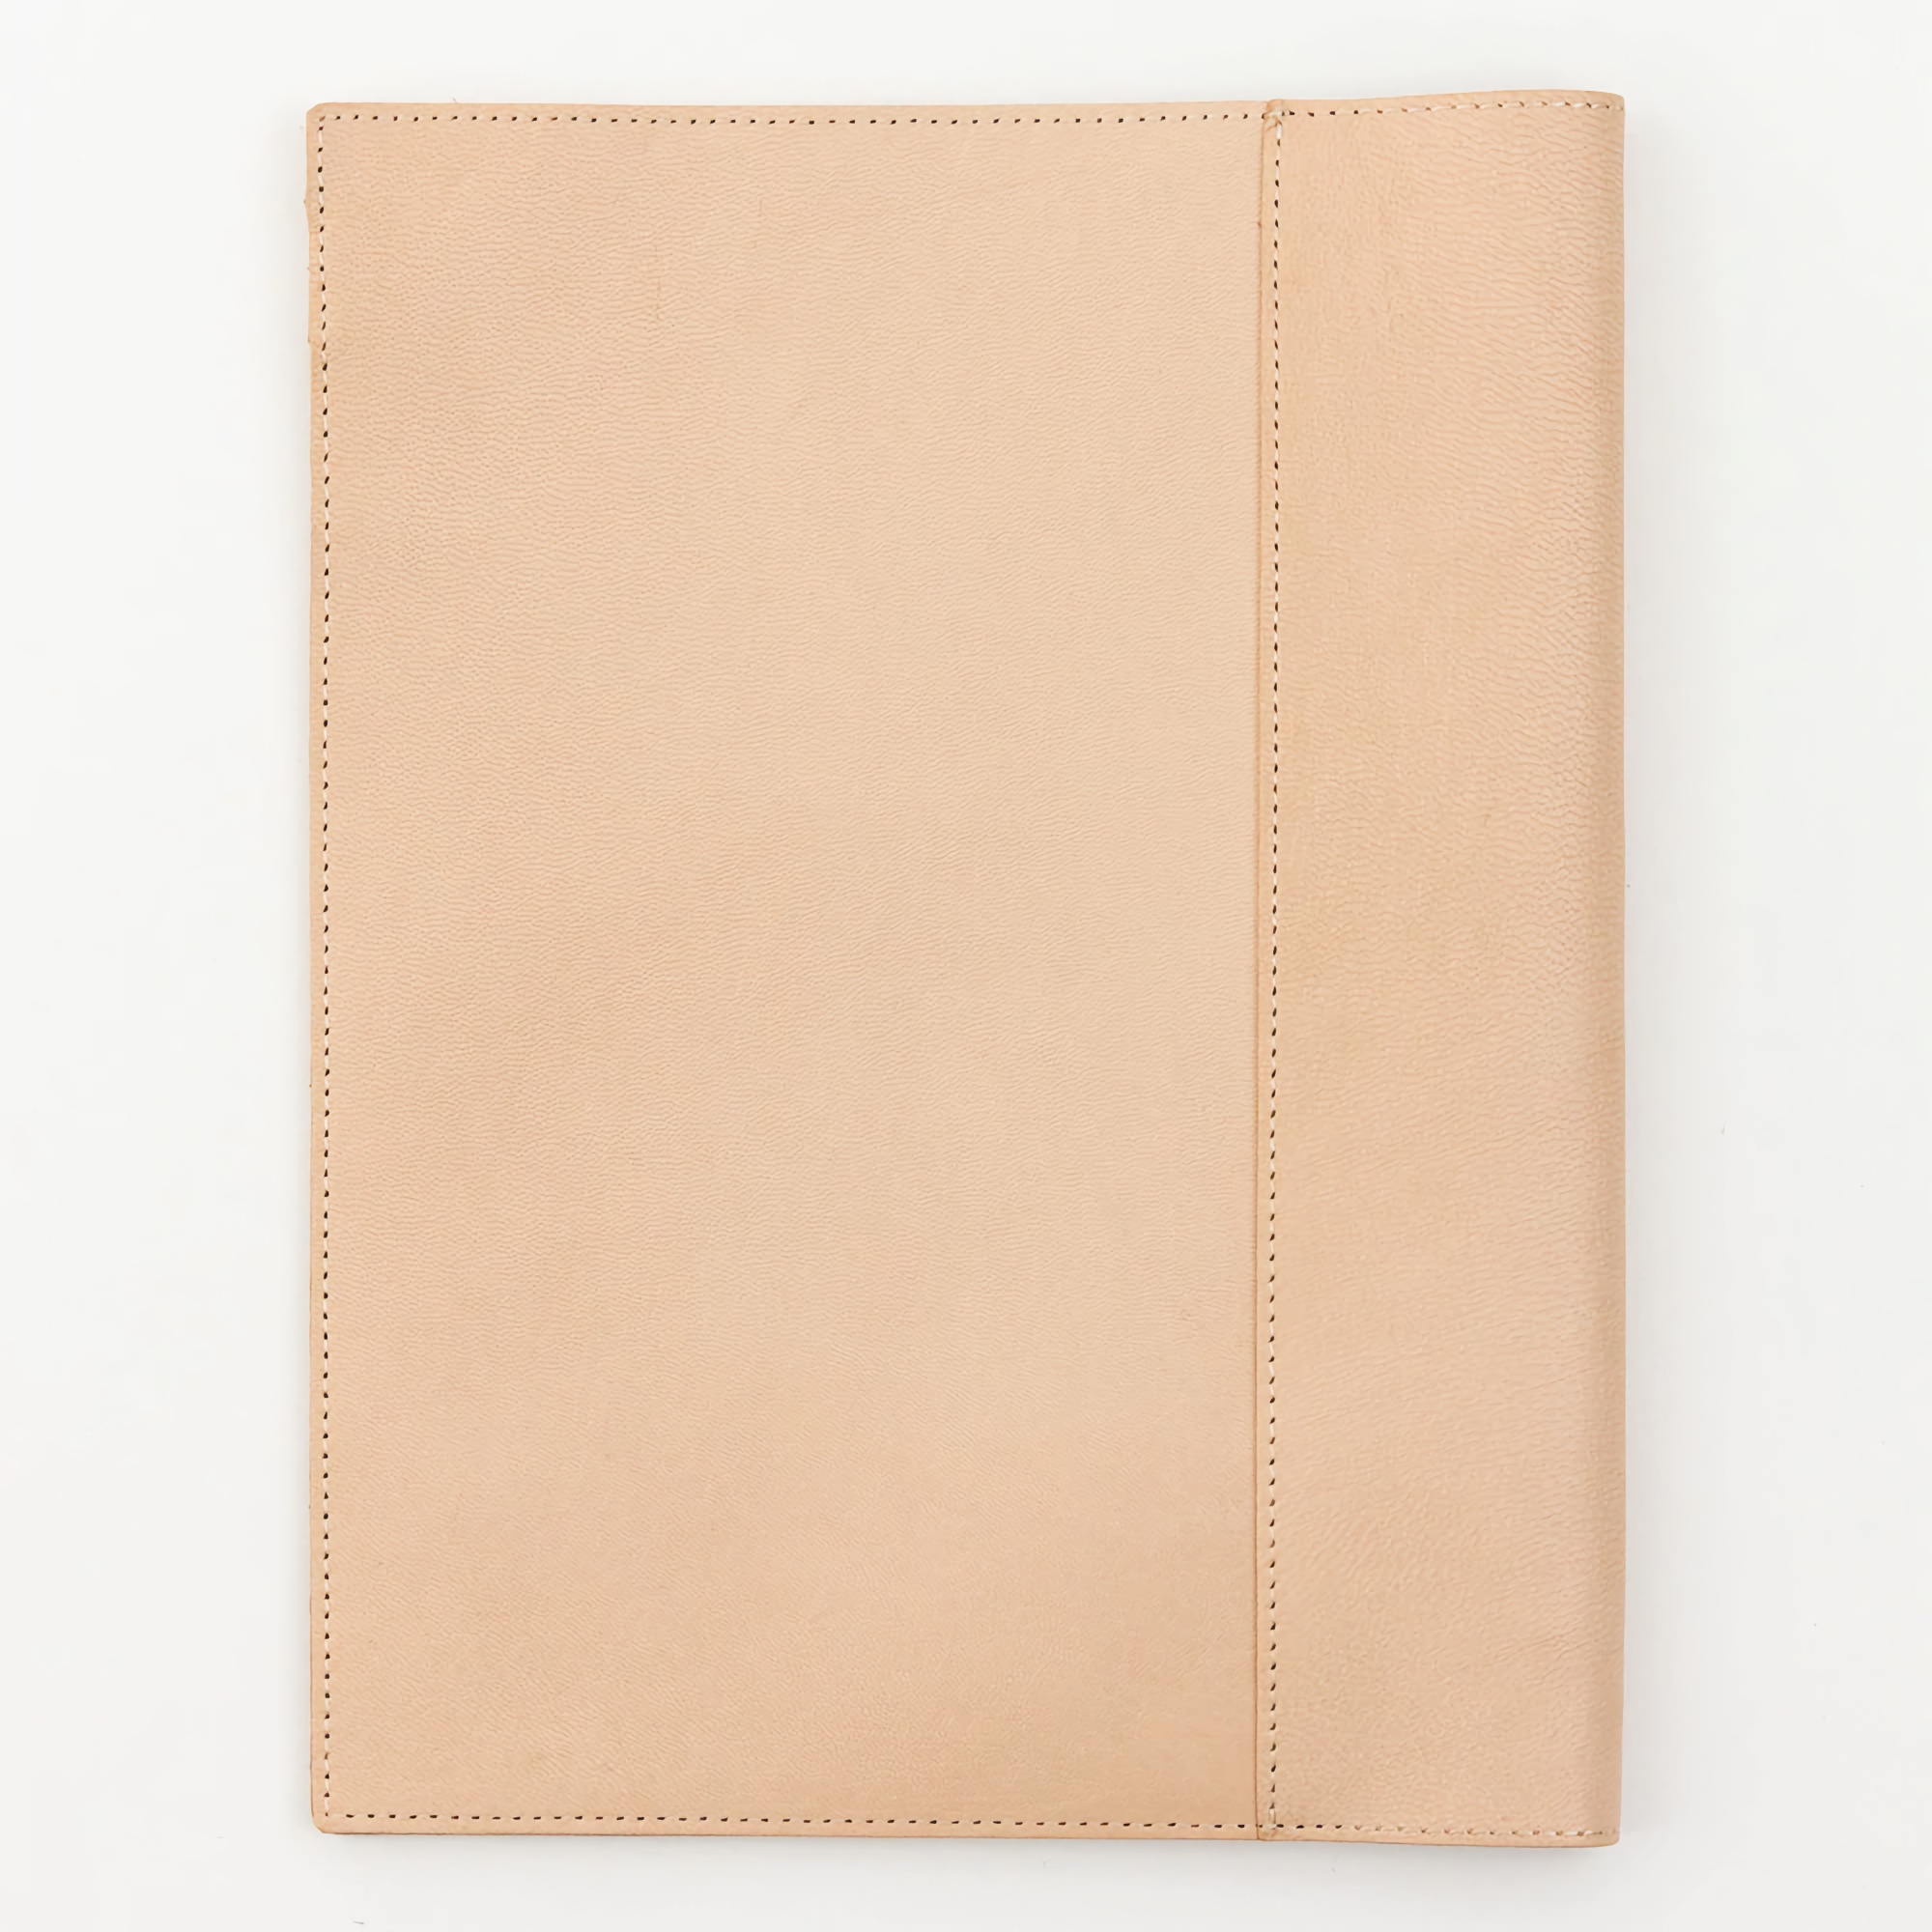 Midori MD Goat Leather Cover [A4]